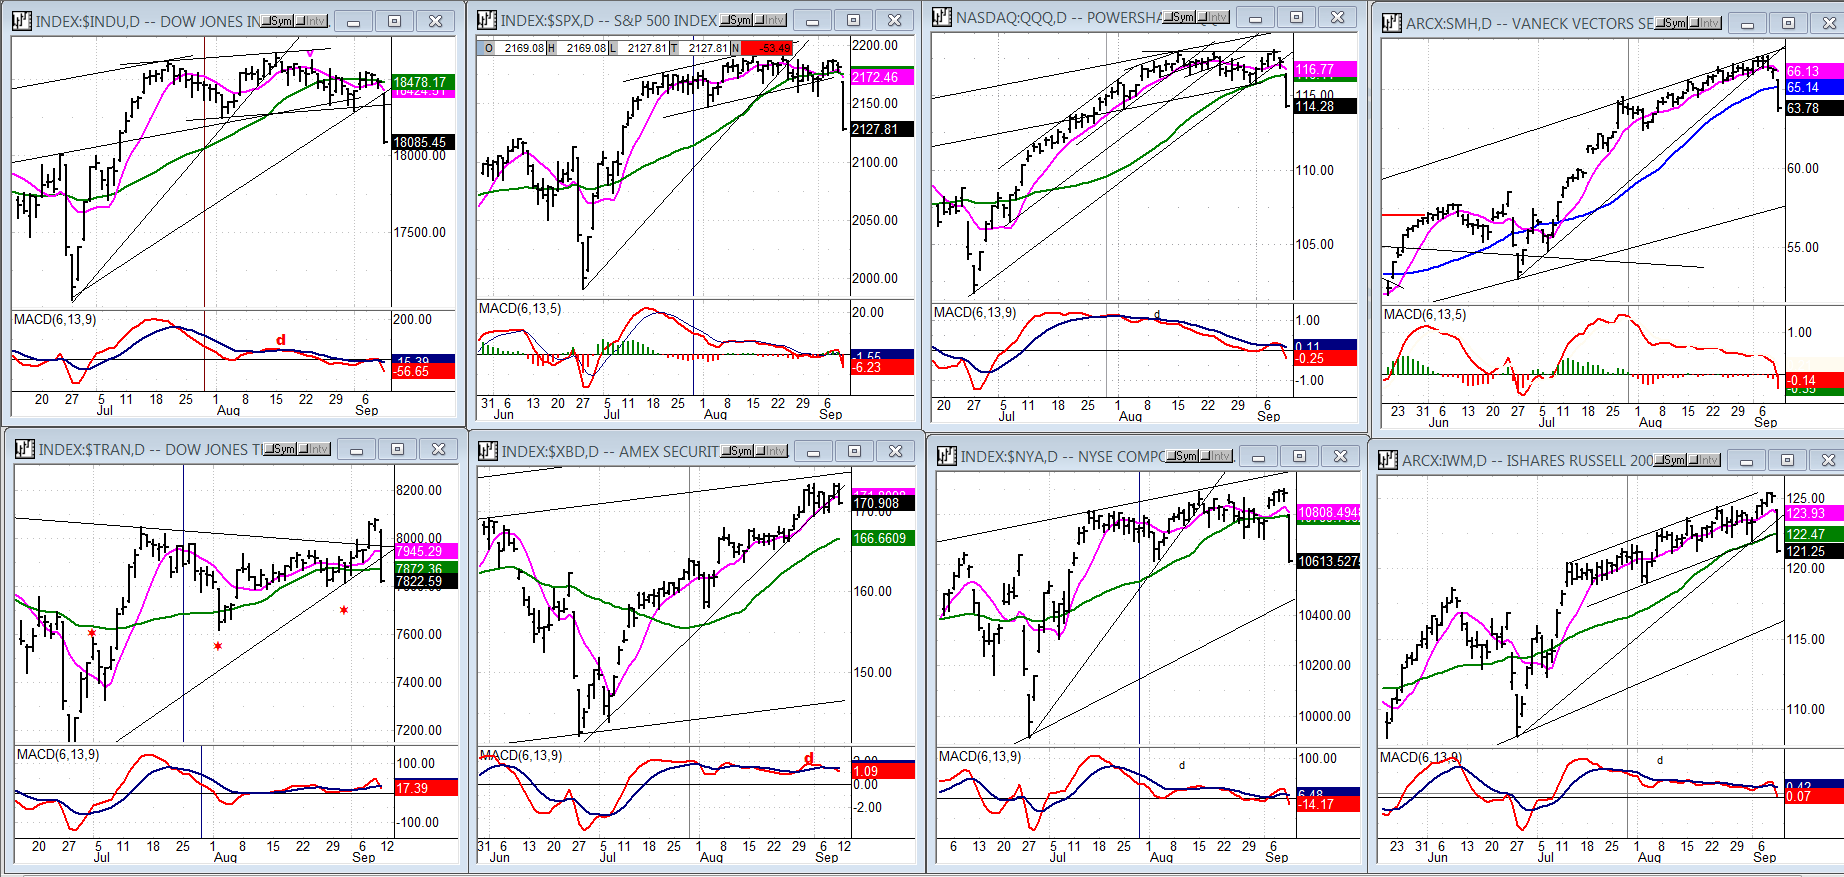 Some Leading & Confirming Indexes